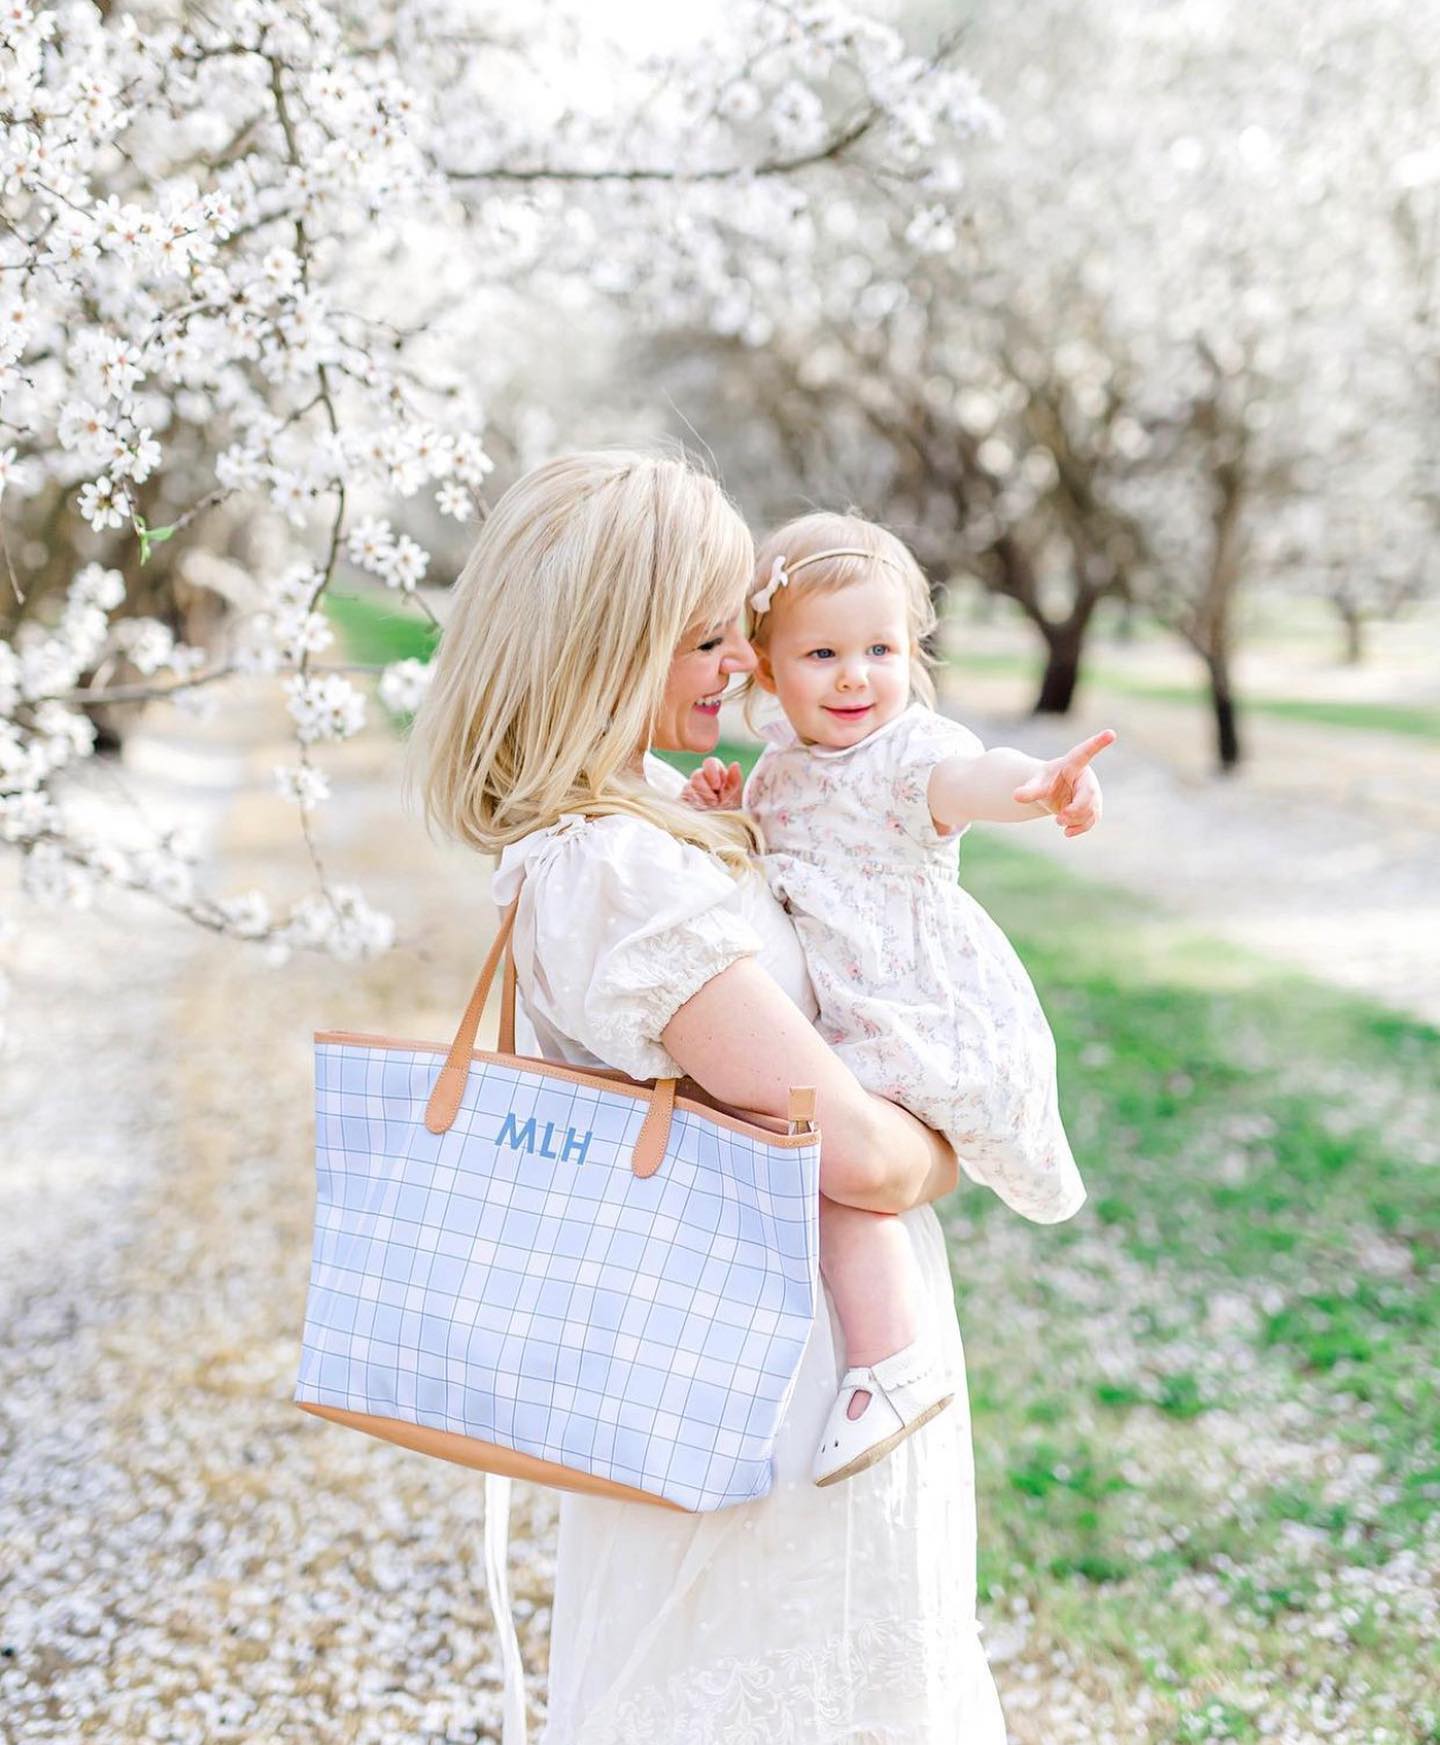 Elegant personalized plaid tote bag for mother and daughter moments